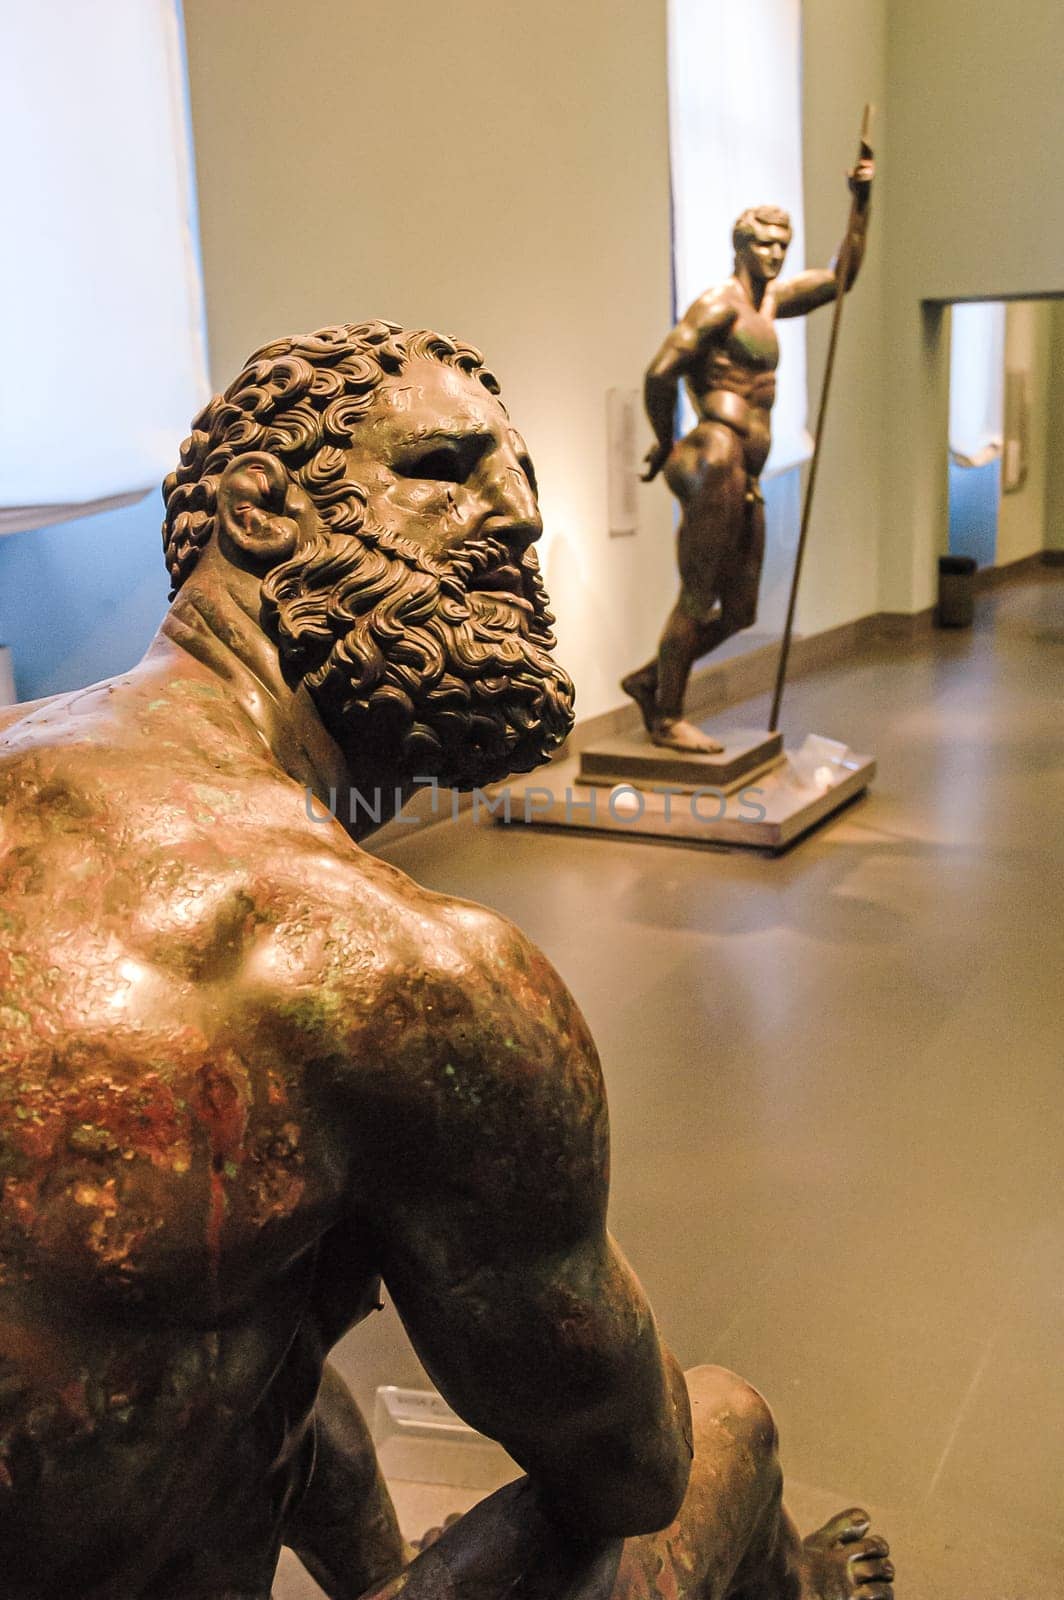 Rome, Italy, August 22, 2008: Wrestler at rest. Palazzo Massimo by ivanmoreno